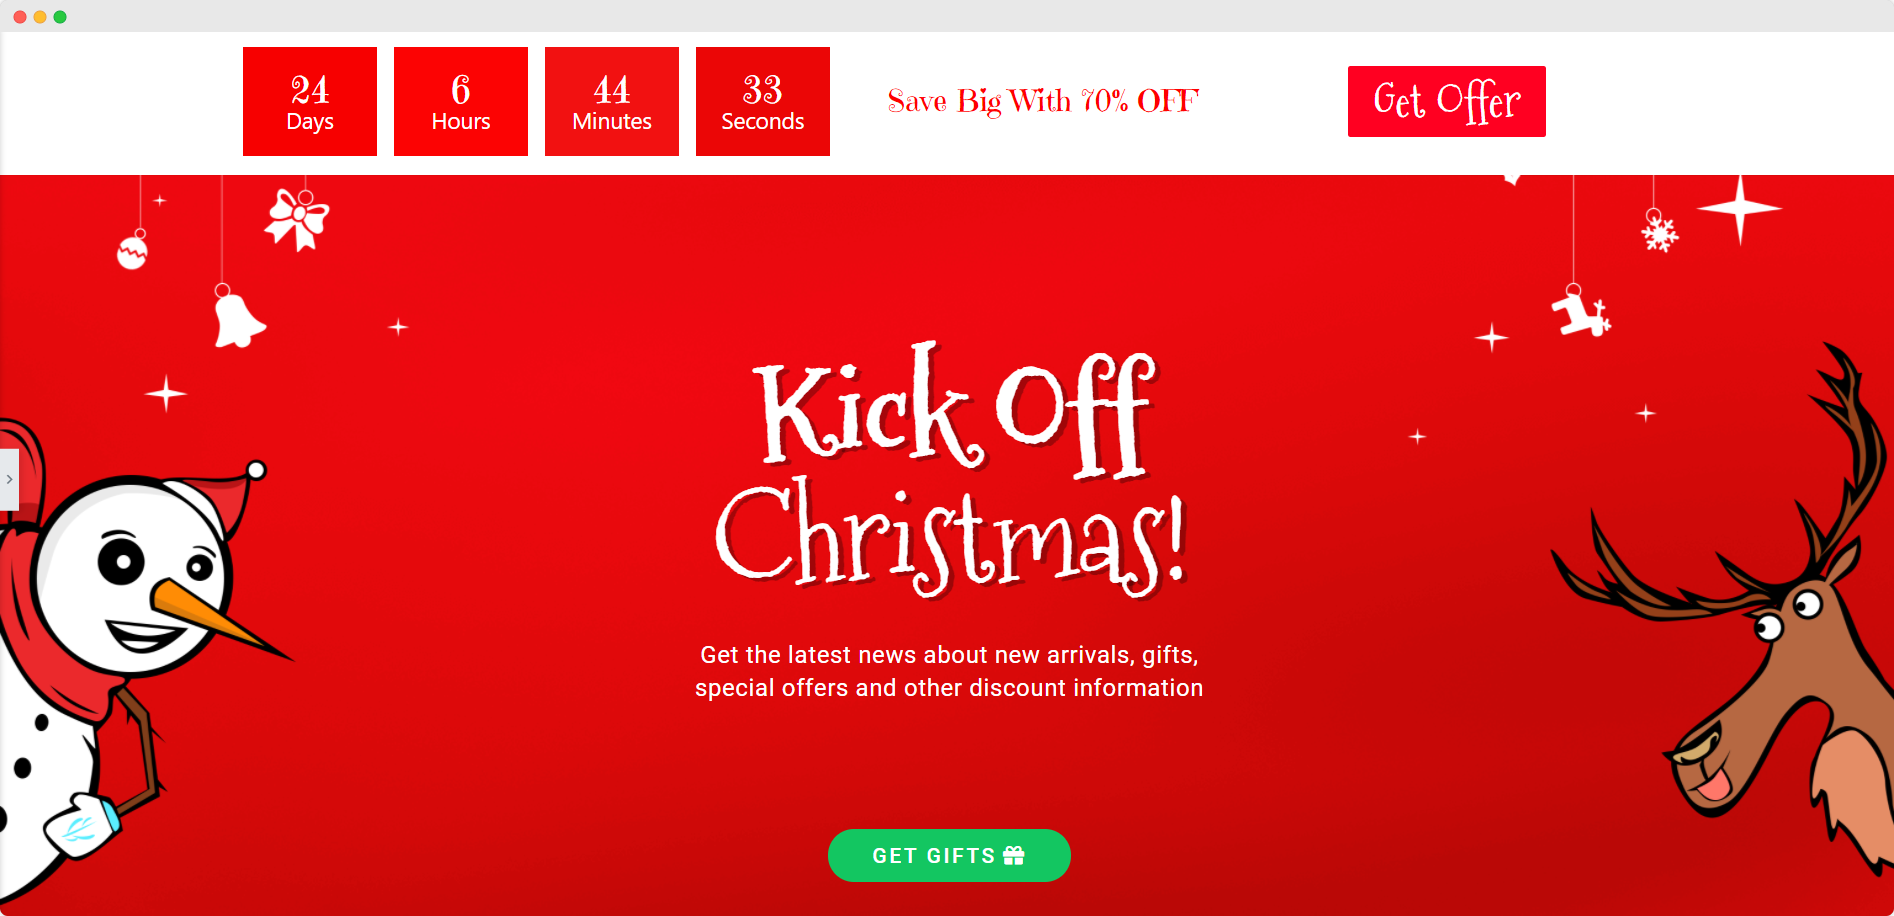 Effective Marketing Strategies To Boost Holiday Sales On Your eCommerce Store 2